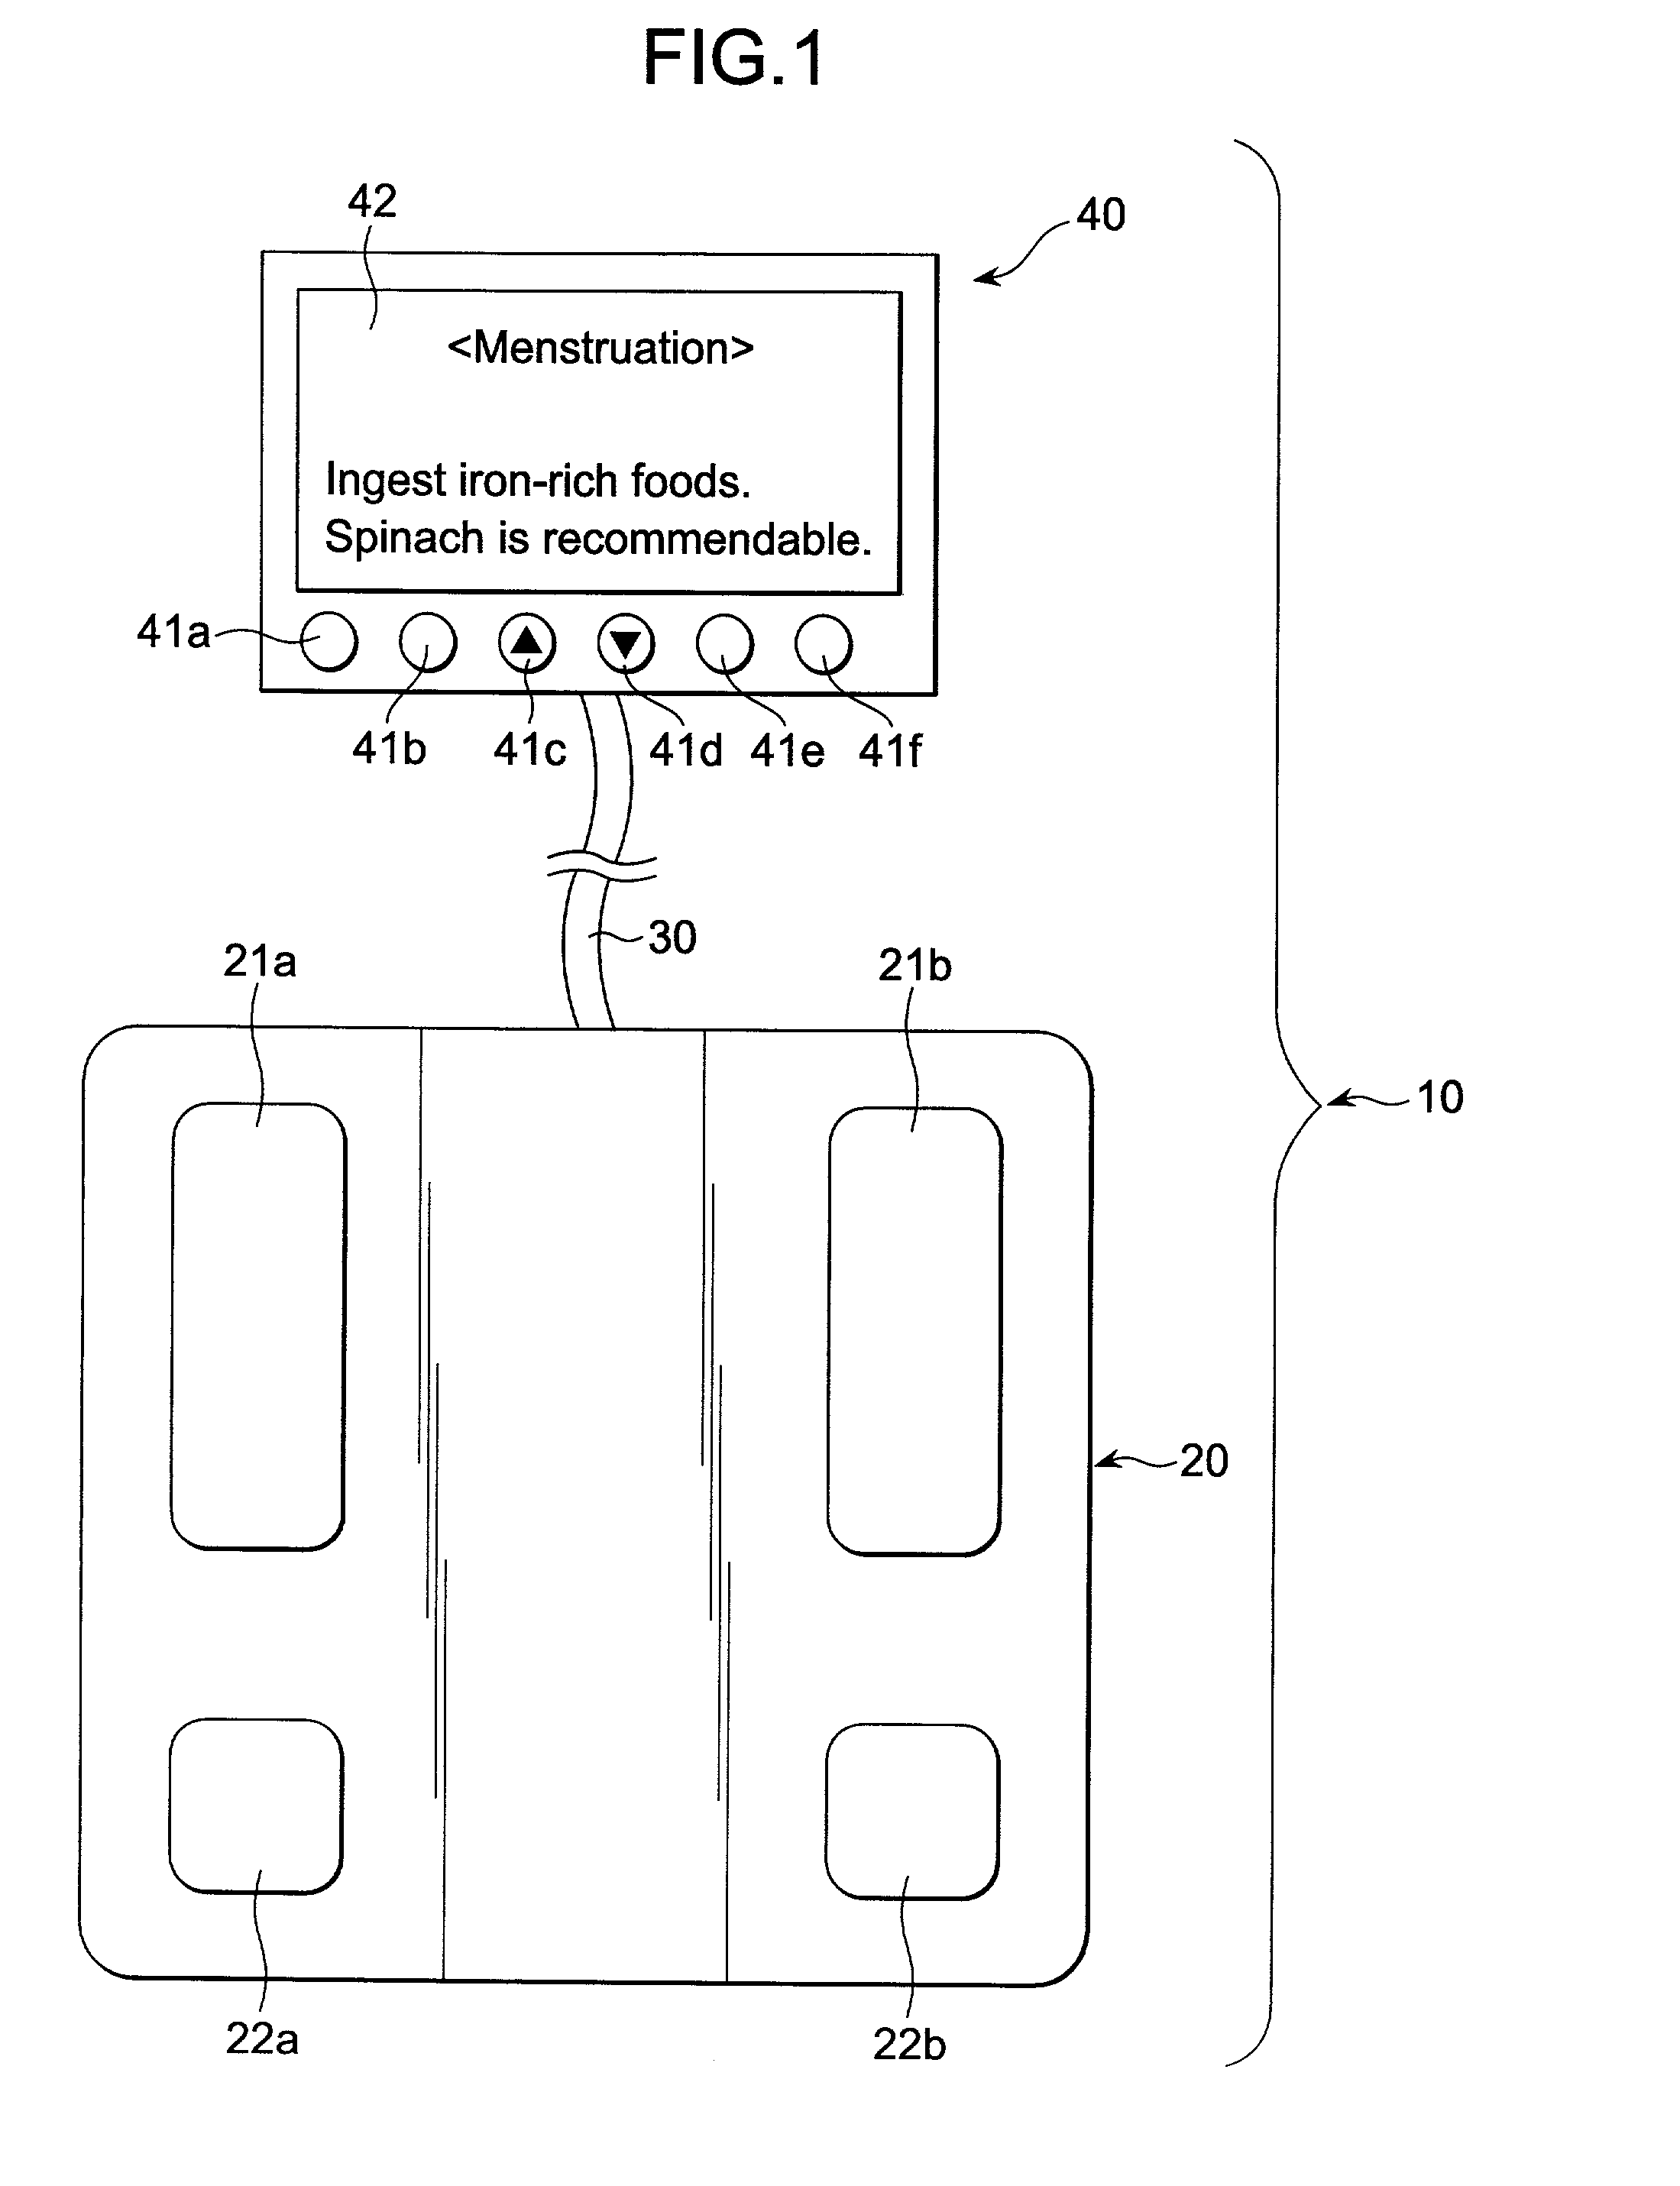 Female physical condition managing apparatus